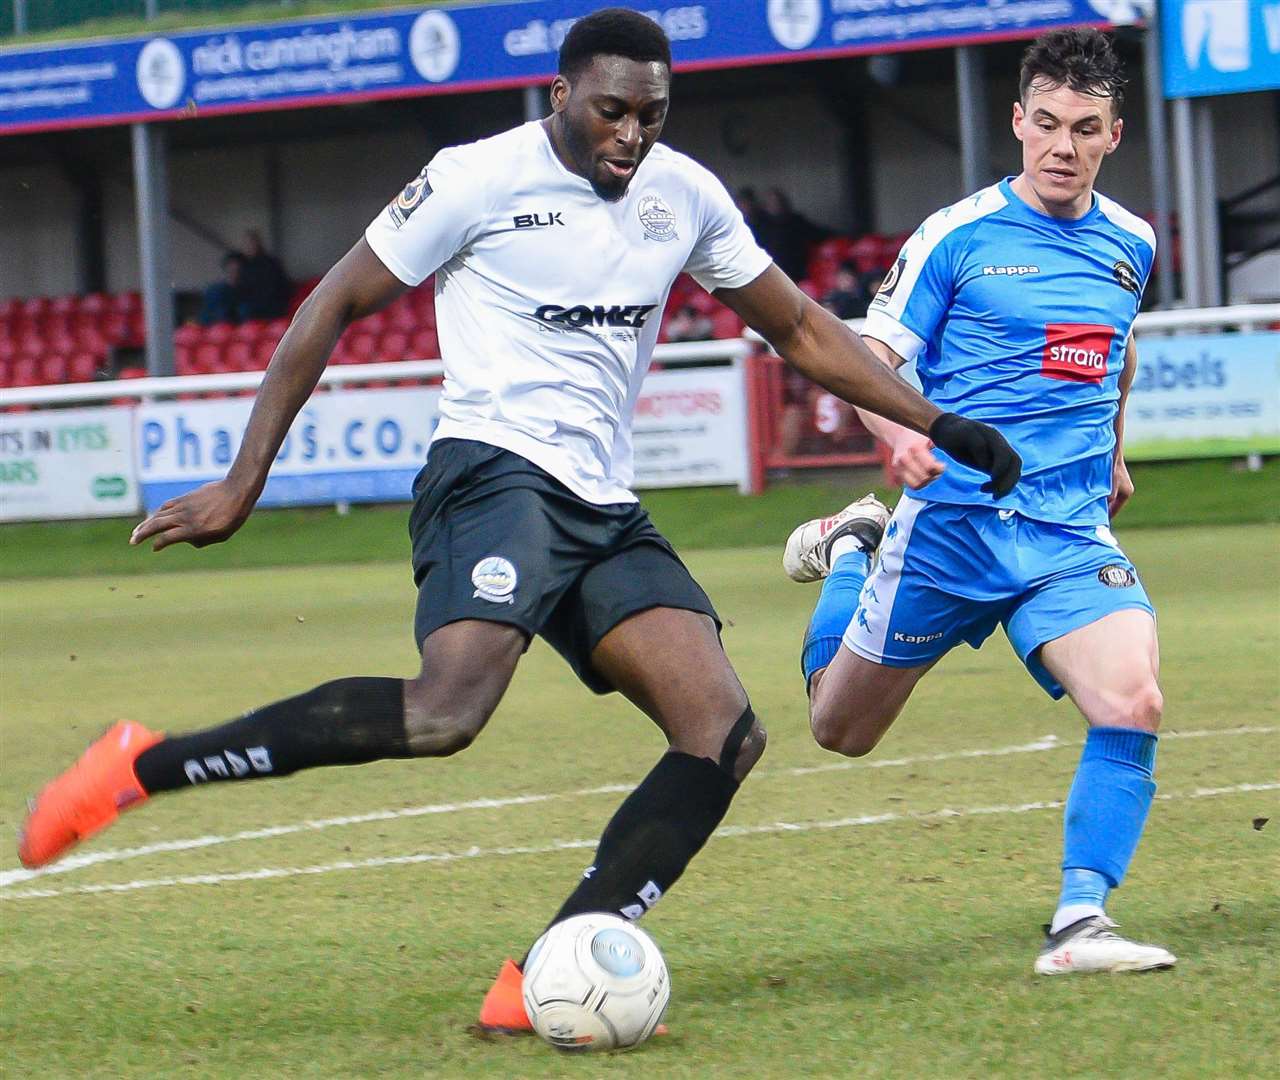 Dover's Inih Effiong gets a shot away against Harrogate Picture: Alan Langley